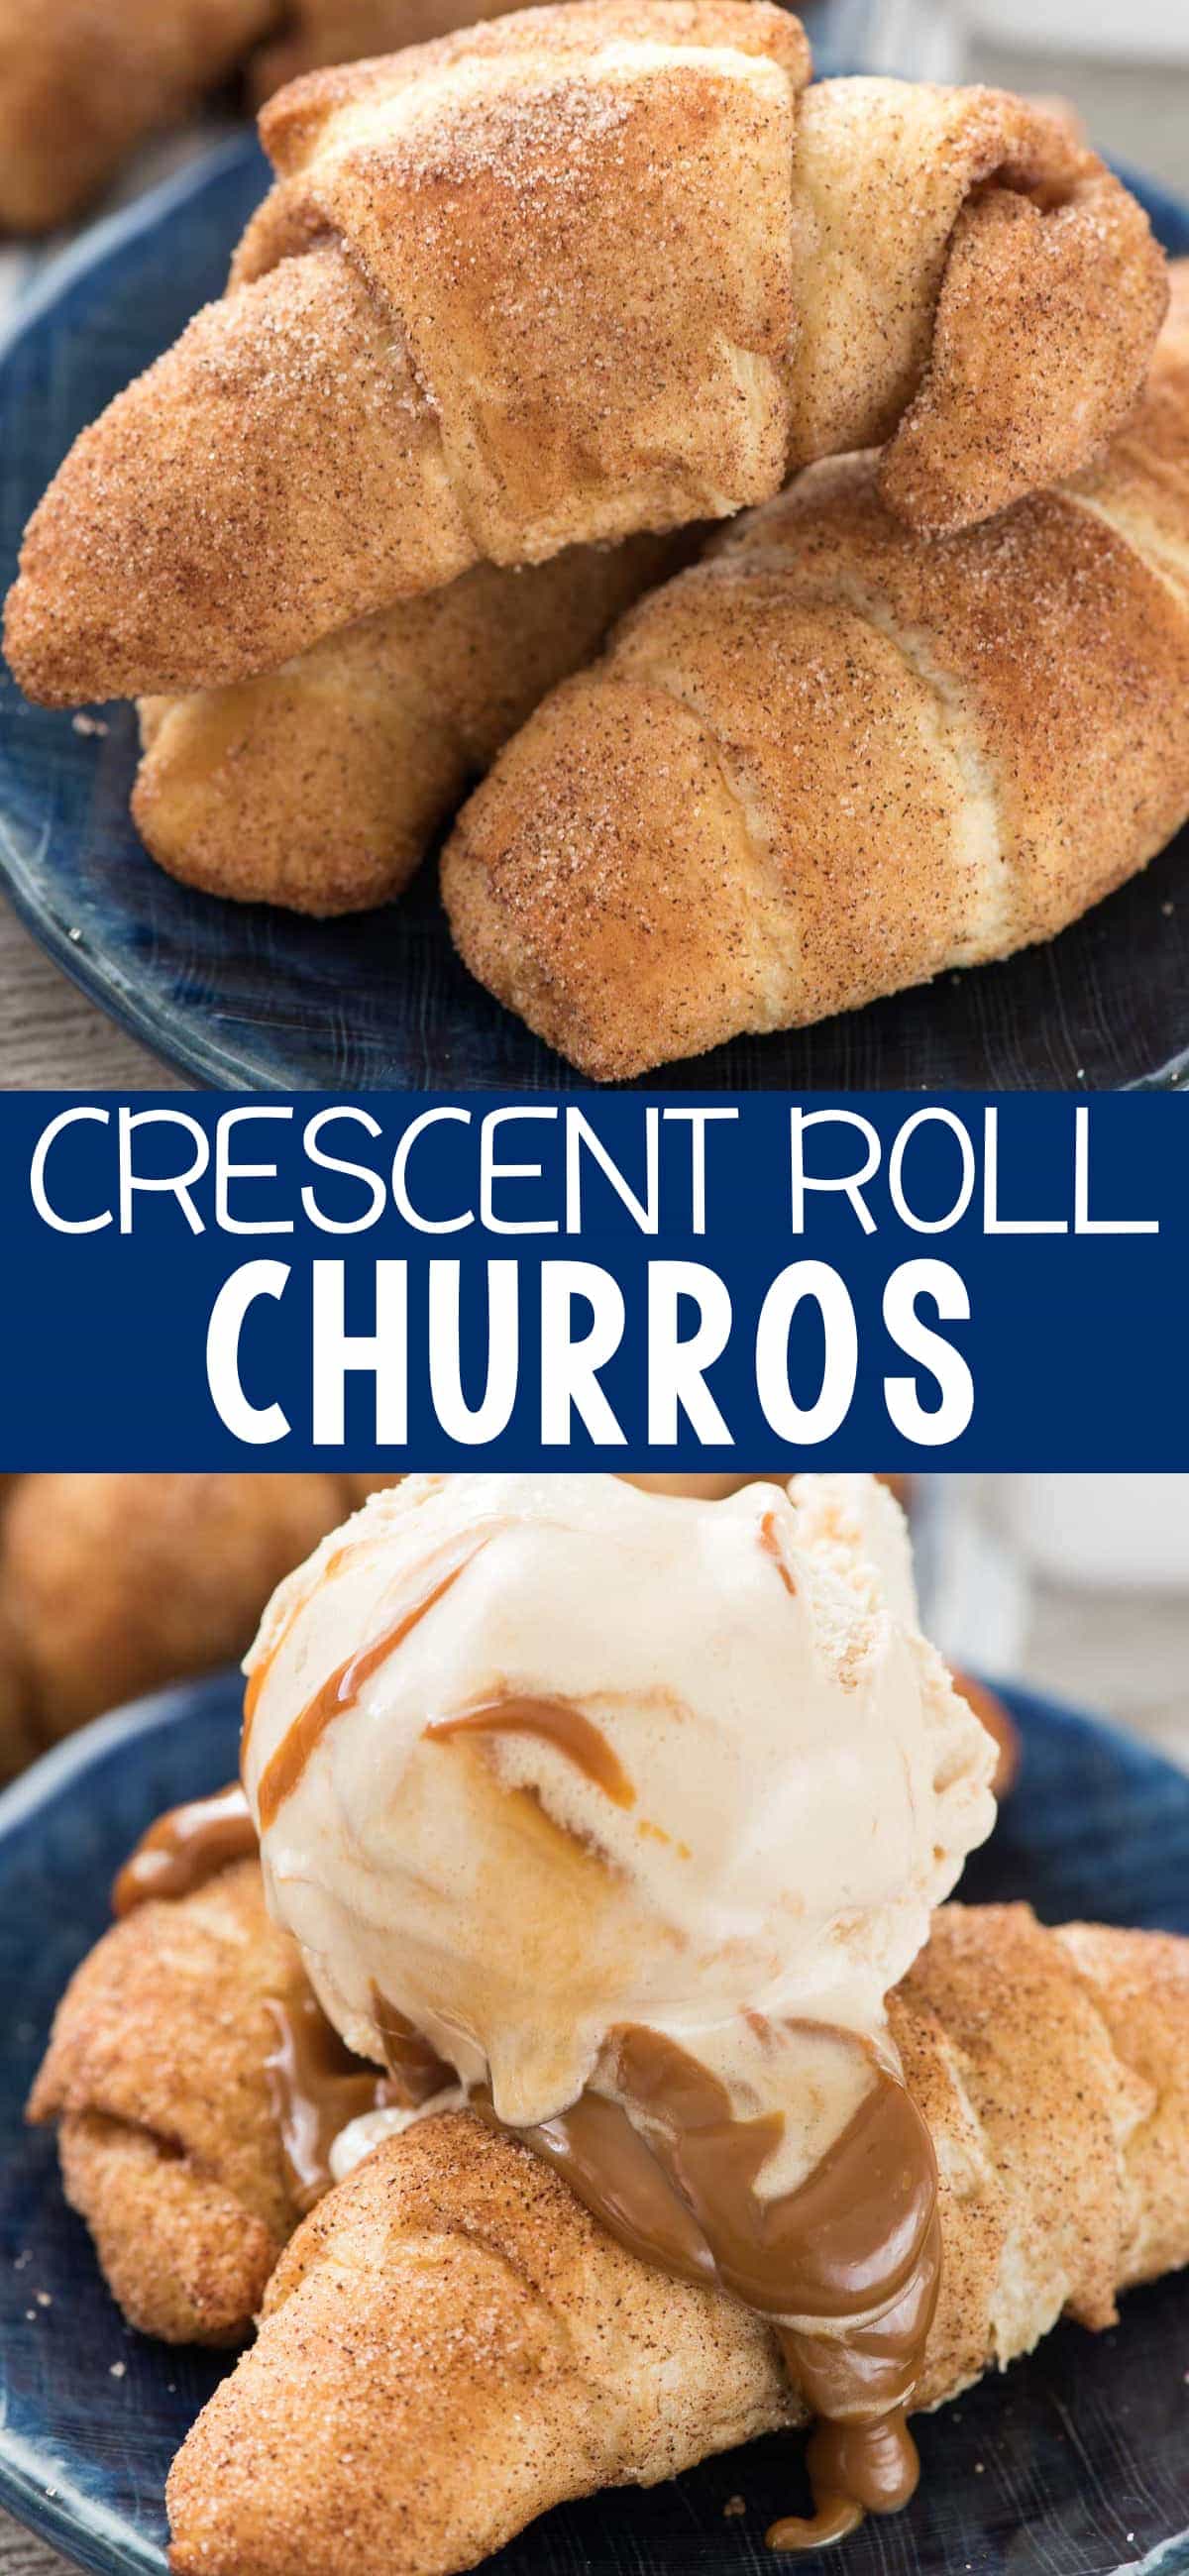 Crescent Roll Churros - this EASY baked churro recipe is crunchy and sweet and full of cinnamon flavor. Only 3 ingredients and are the perfect breakfast, brunch, or dessert recipe!